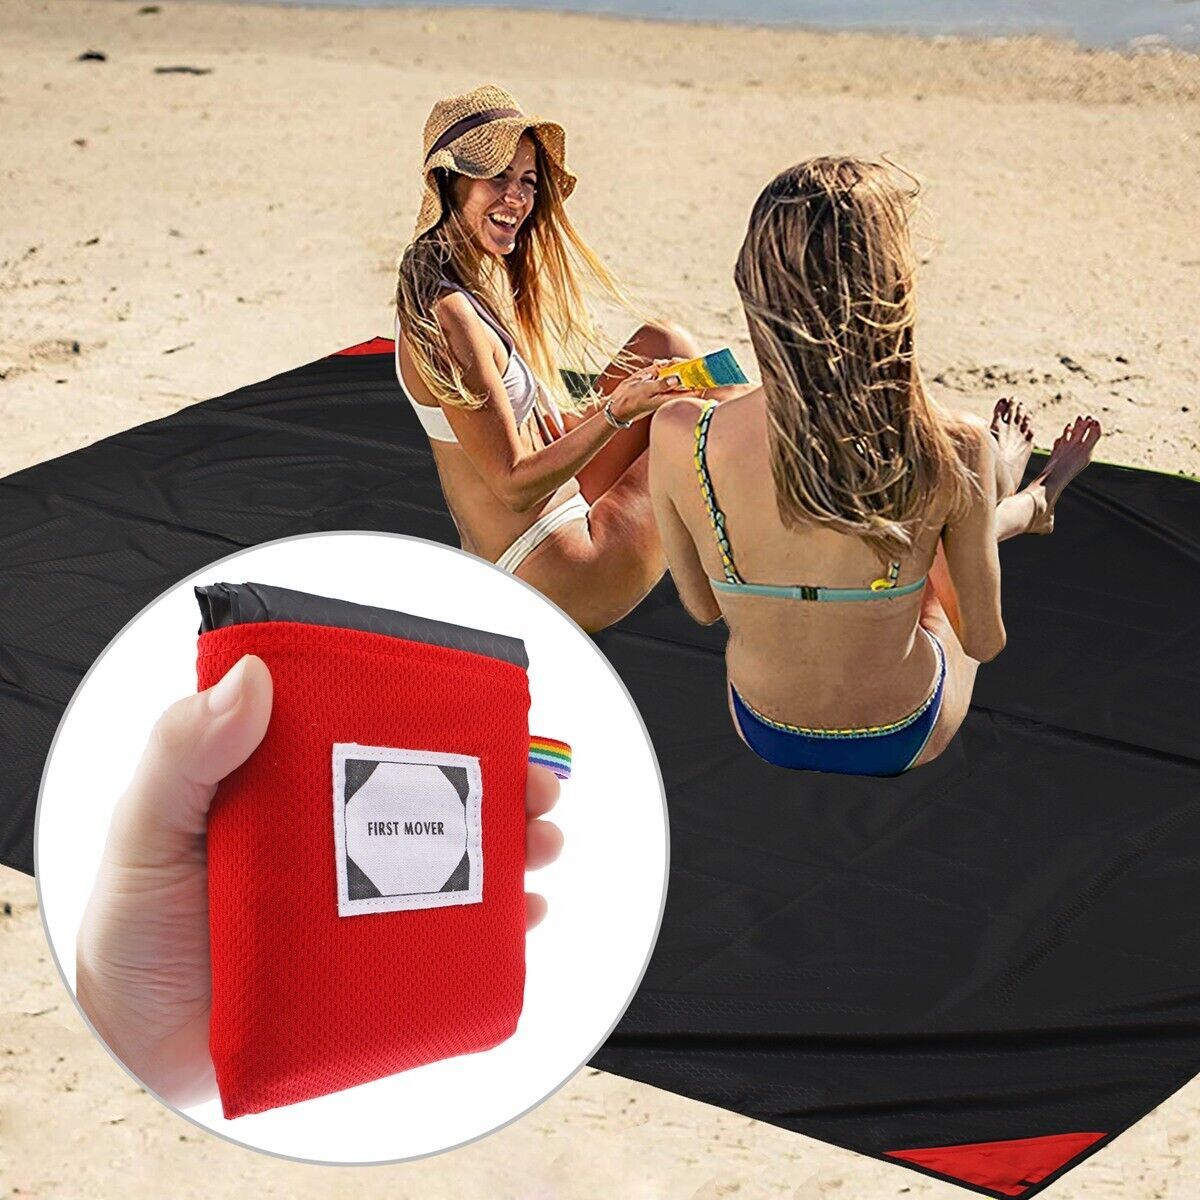 Primary image for Outdoor Pocket Picnic Blanket Waterproof Beach Mat Camping Travel Sand Free Rug